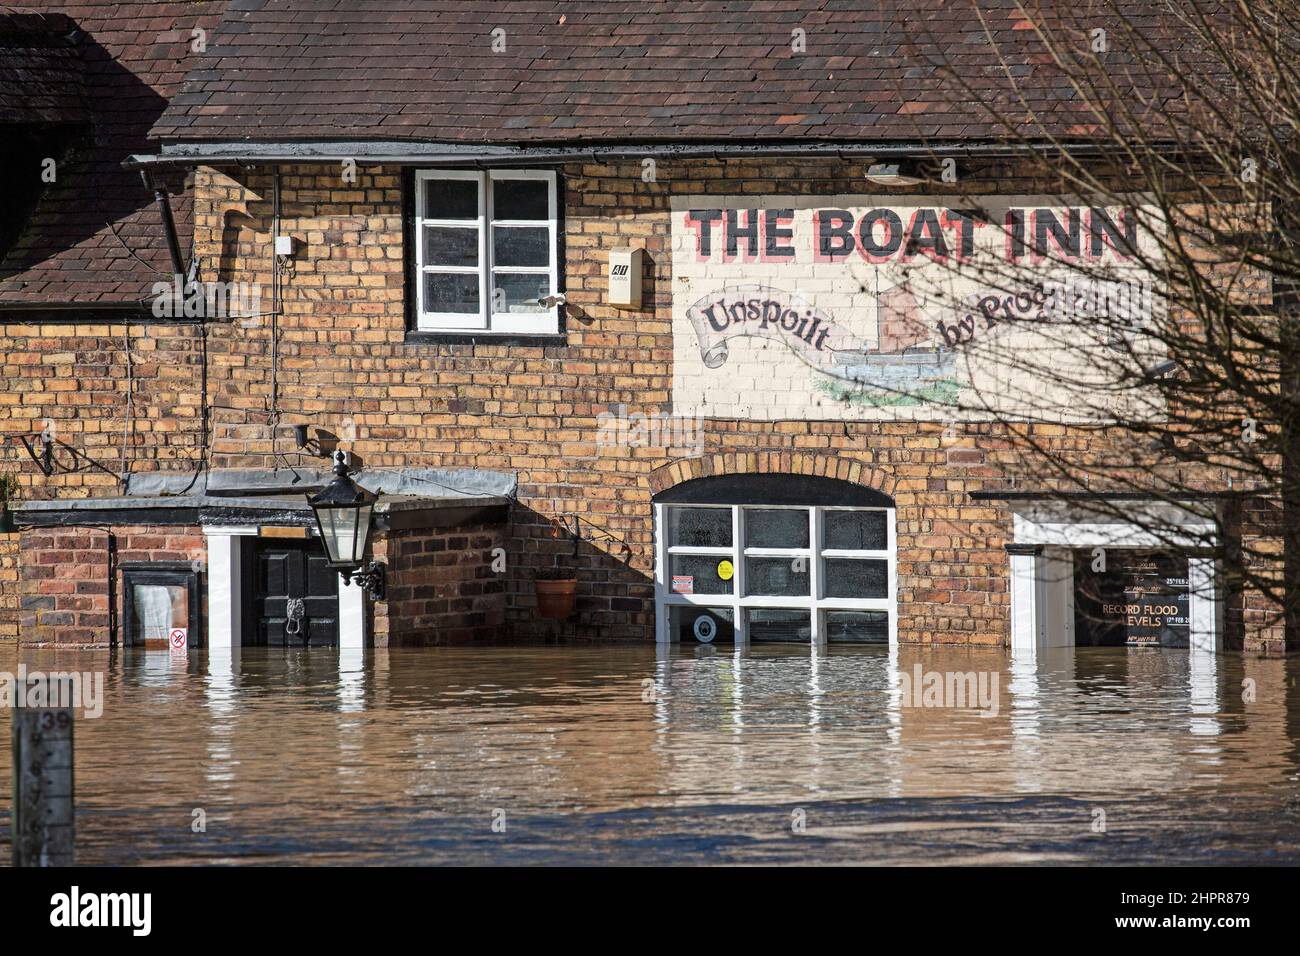 Shropshire, England. 23/02/2022, The Boat Inn, in the village of Jackfield in the Ironbridge Gorge World heritage site in Shropshire, is always one of the first victims when the River Severn bursts its banks in the area. Flood levels are recorded on the outside of the old entrance way. Once agin, after a week of severe storms, the pub finds itself underwater once again. Stock Photo